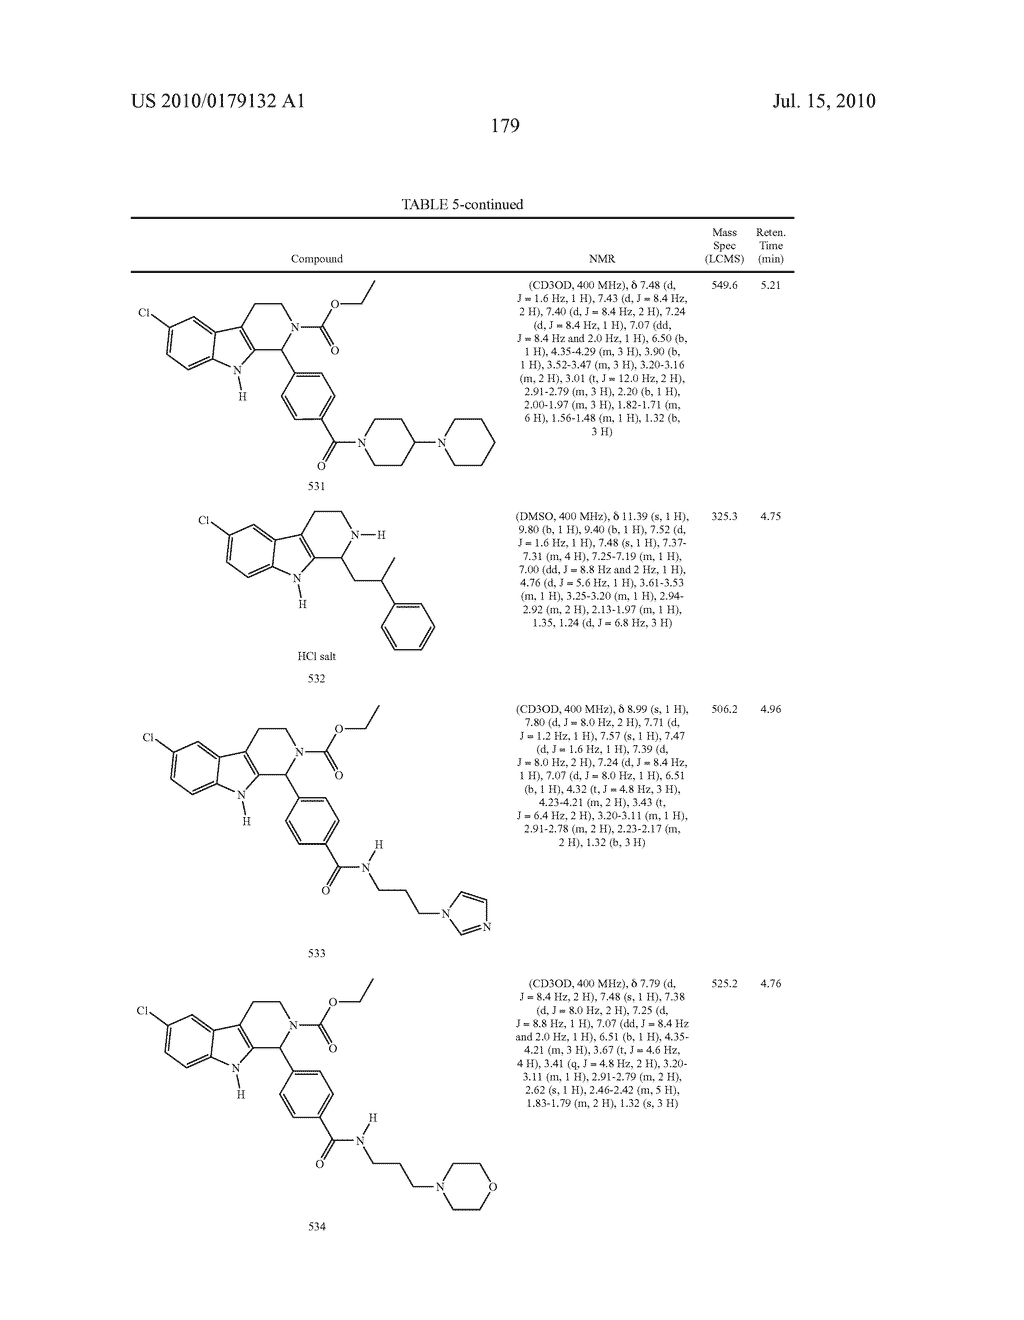 CARBOLINE DERIVATIVES USEFUL IN THE INHIBITION OF ANGIOGENESIS - diagram, schematic, and image 193